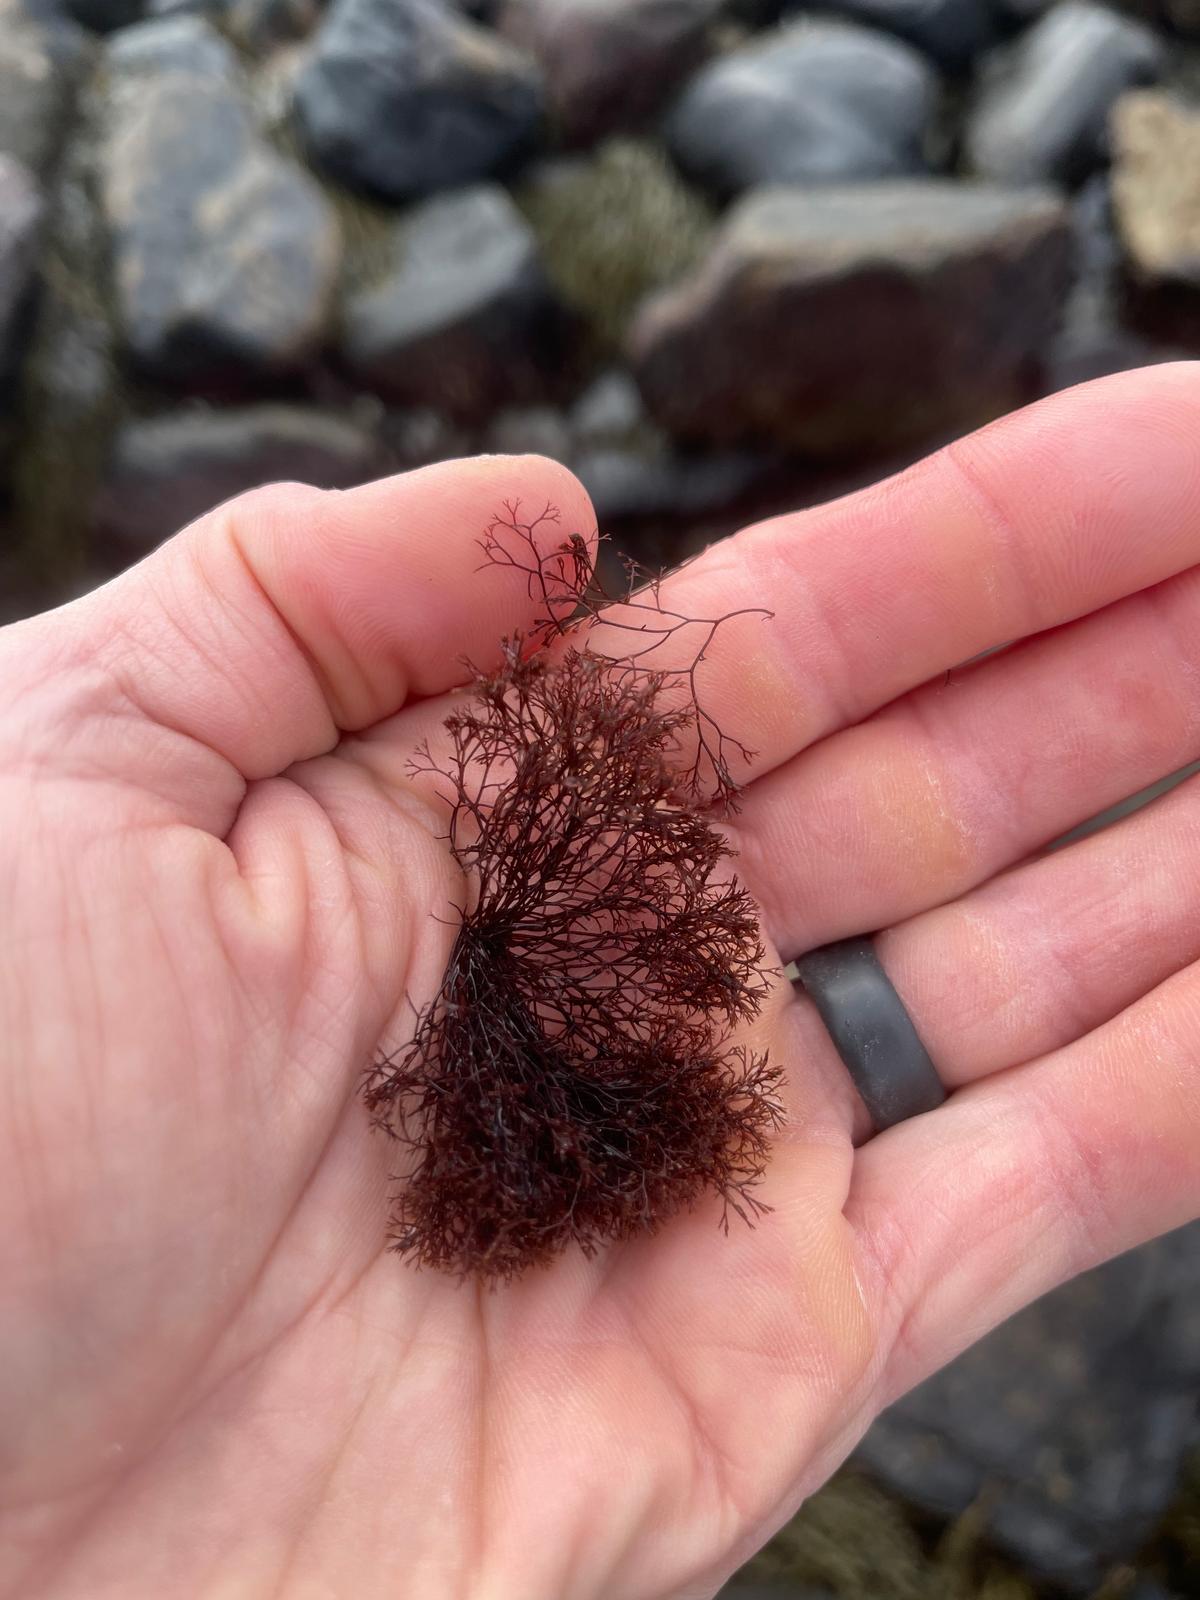 Foraged sea truffle, a red algae reminiscent of black truffles, from the New England coast. (Evan Hennessey)